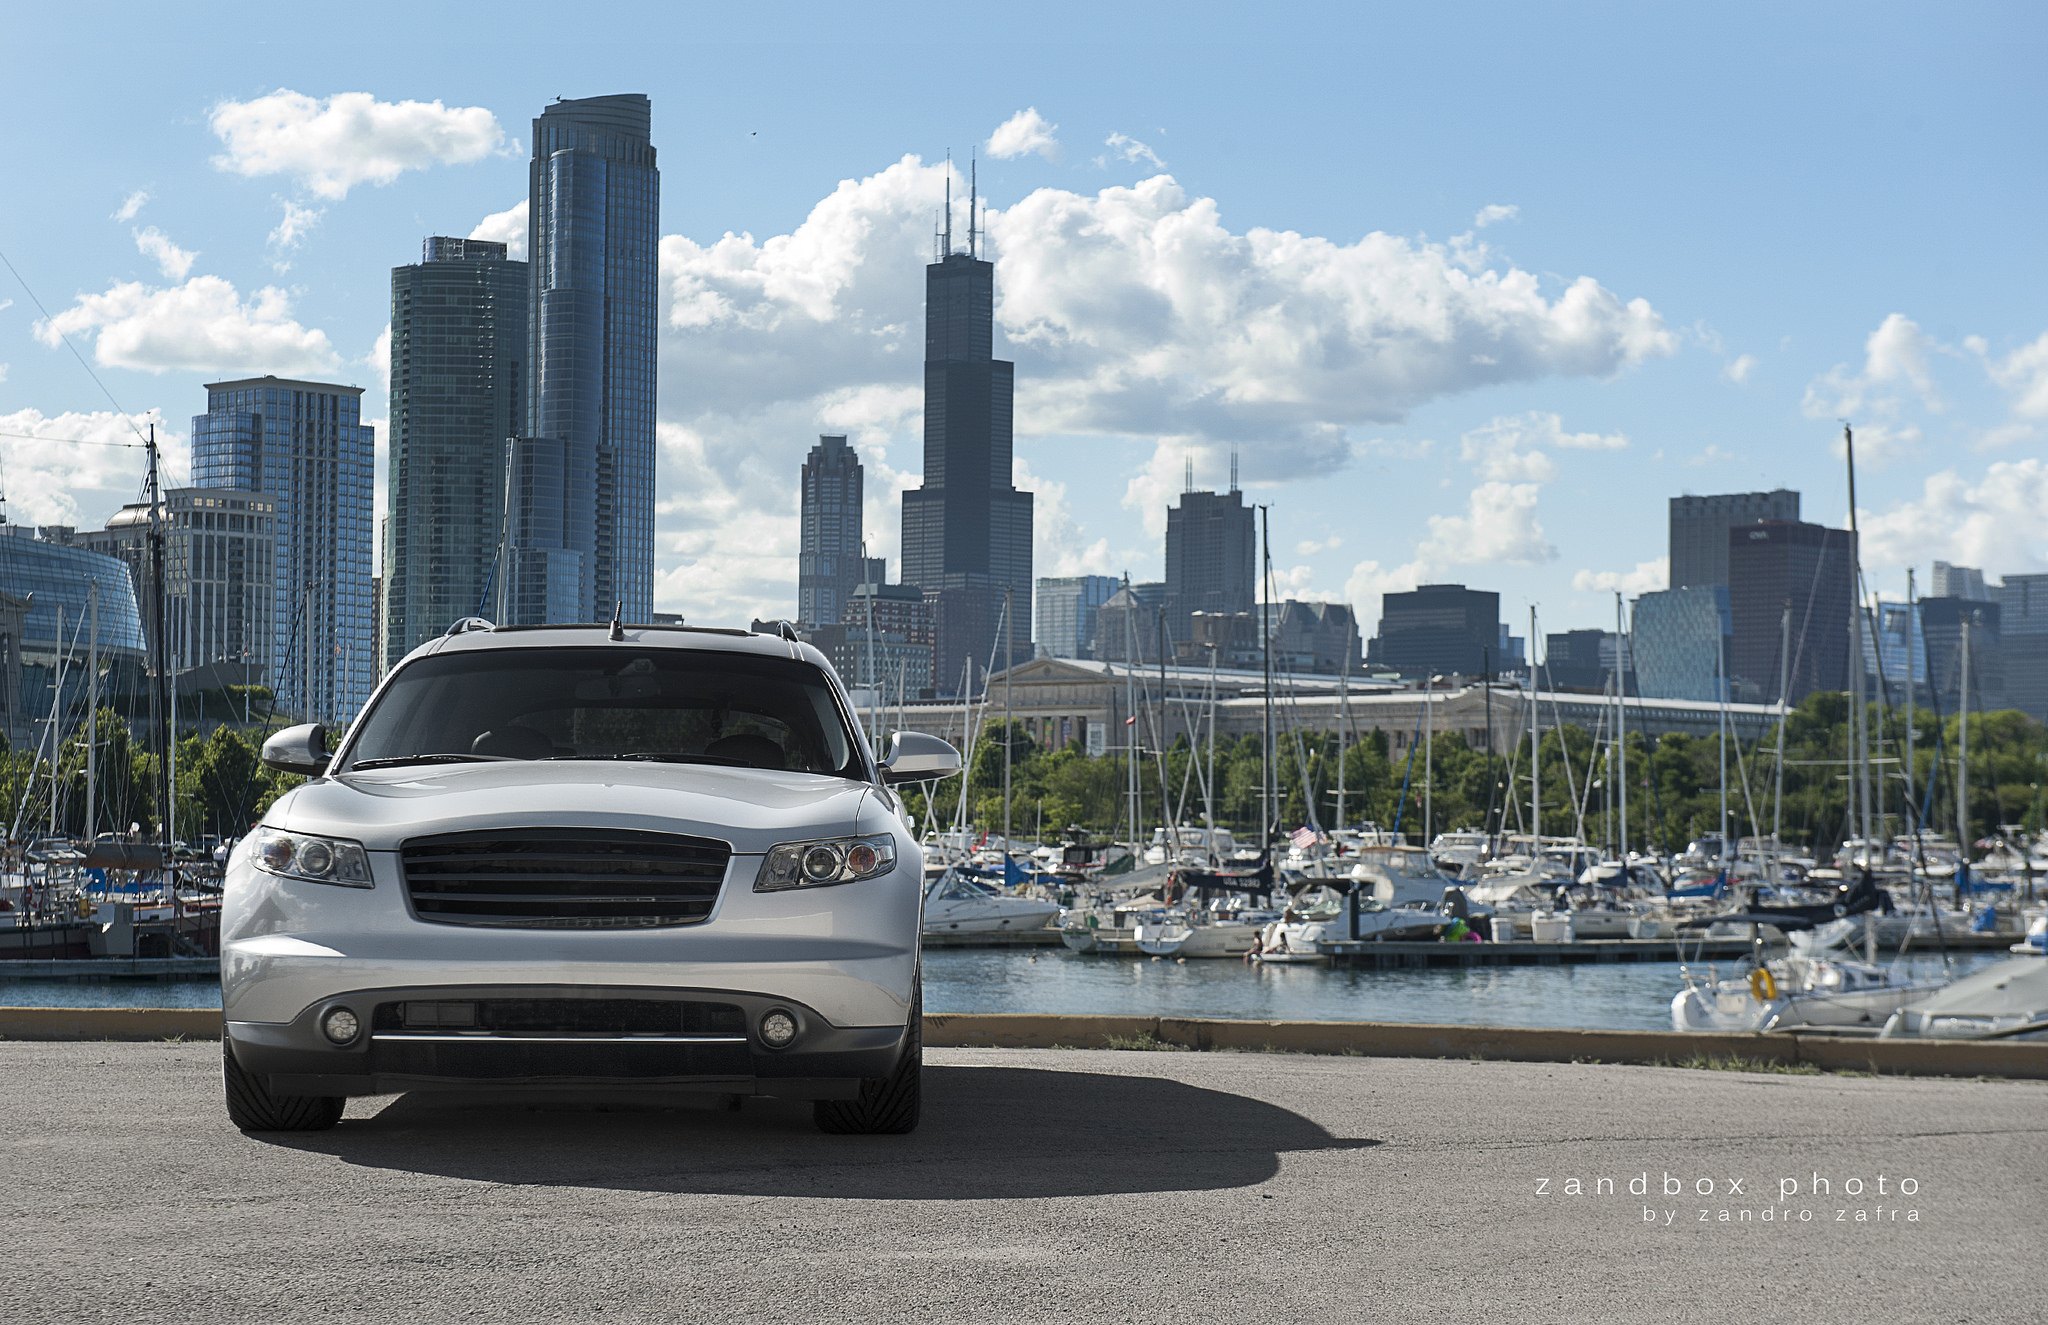 Silver Infiniti FX45 with Blacked Out Billet Grille - Photo by zandbox